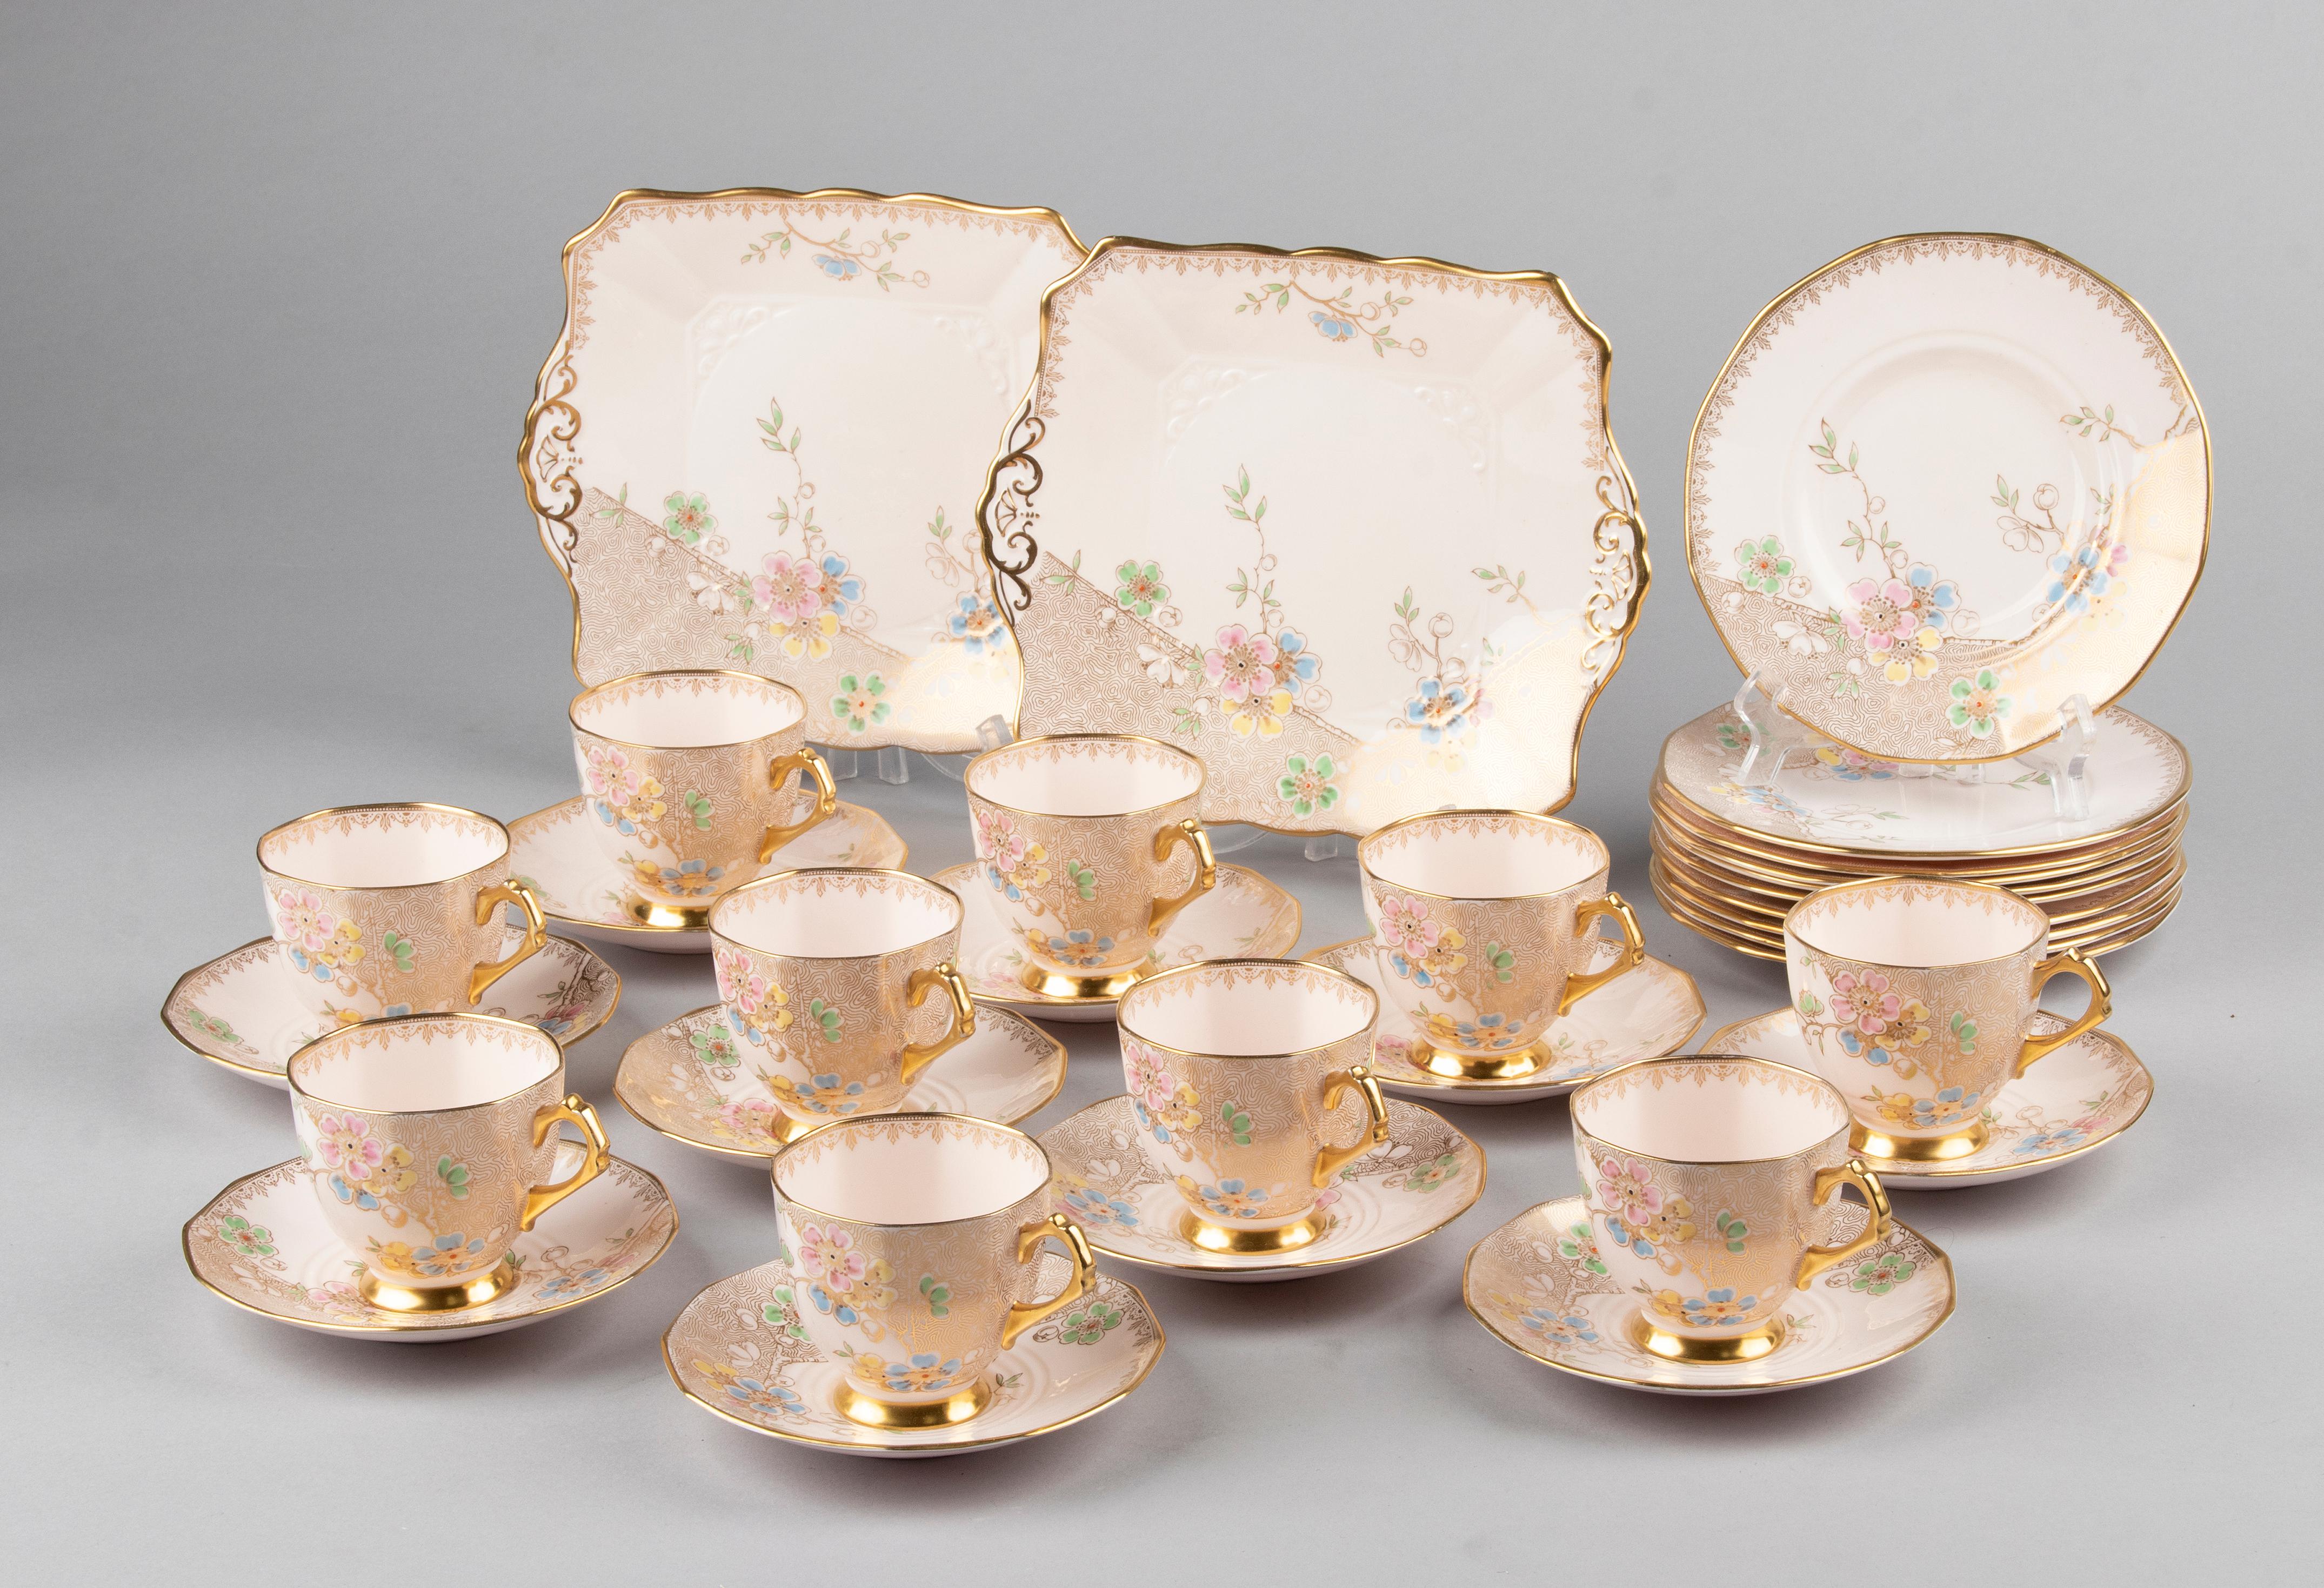 Beautiful Art Deco porcelain tea set from the English brand Tuscan. The service has a nice pink color and is decorated with flowers and fine gold-coloured accents. The name of the model is Plant. The set is in very nice condition. No chips and no